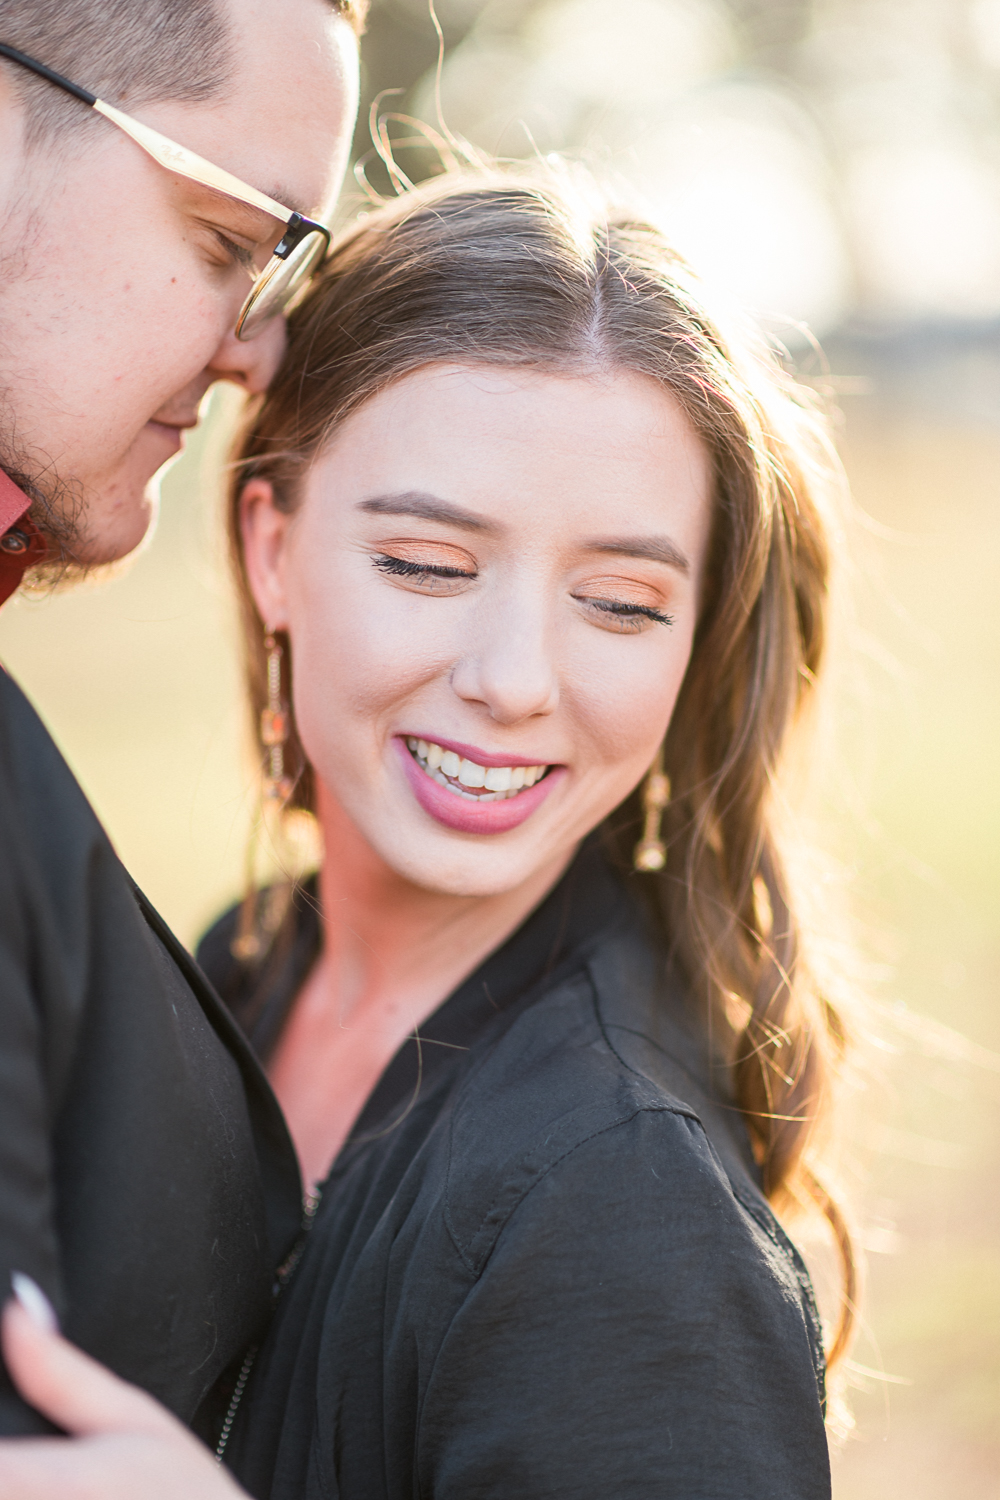 Romantic Engagement Session in Charlottesville, VA - Hunter and Sarah Photography